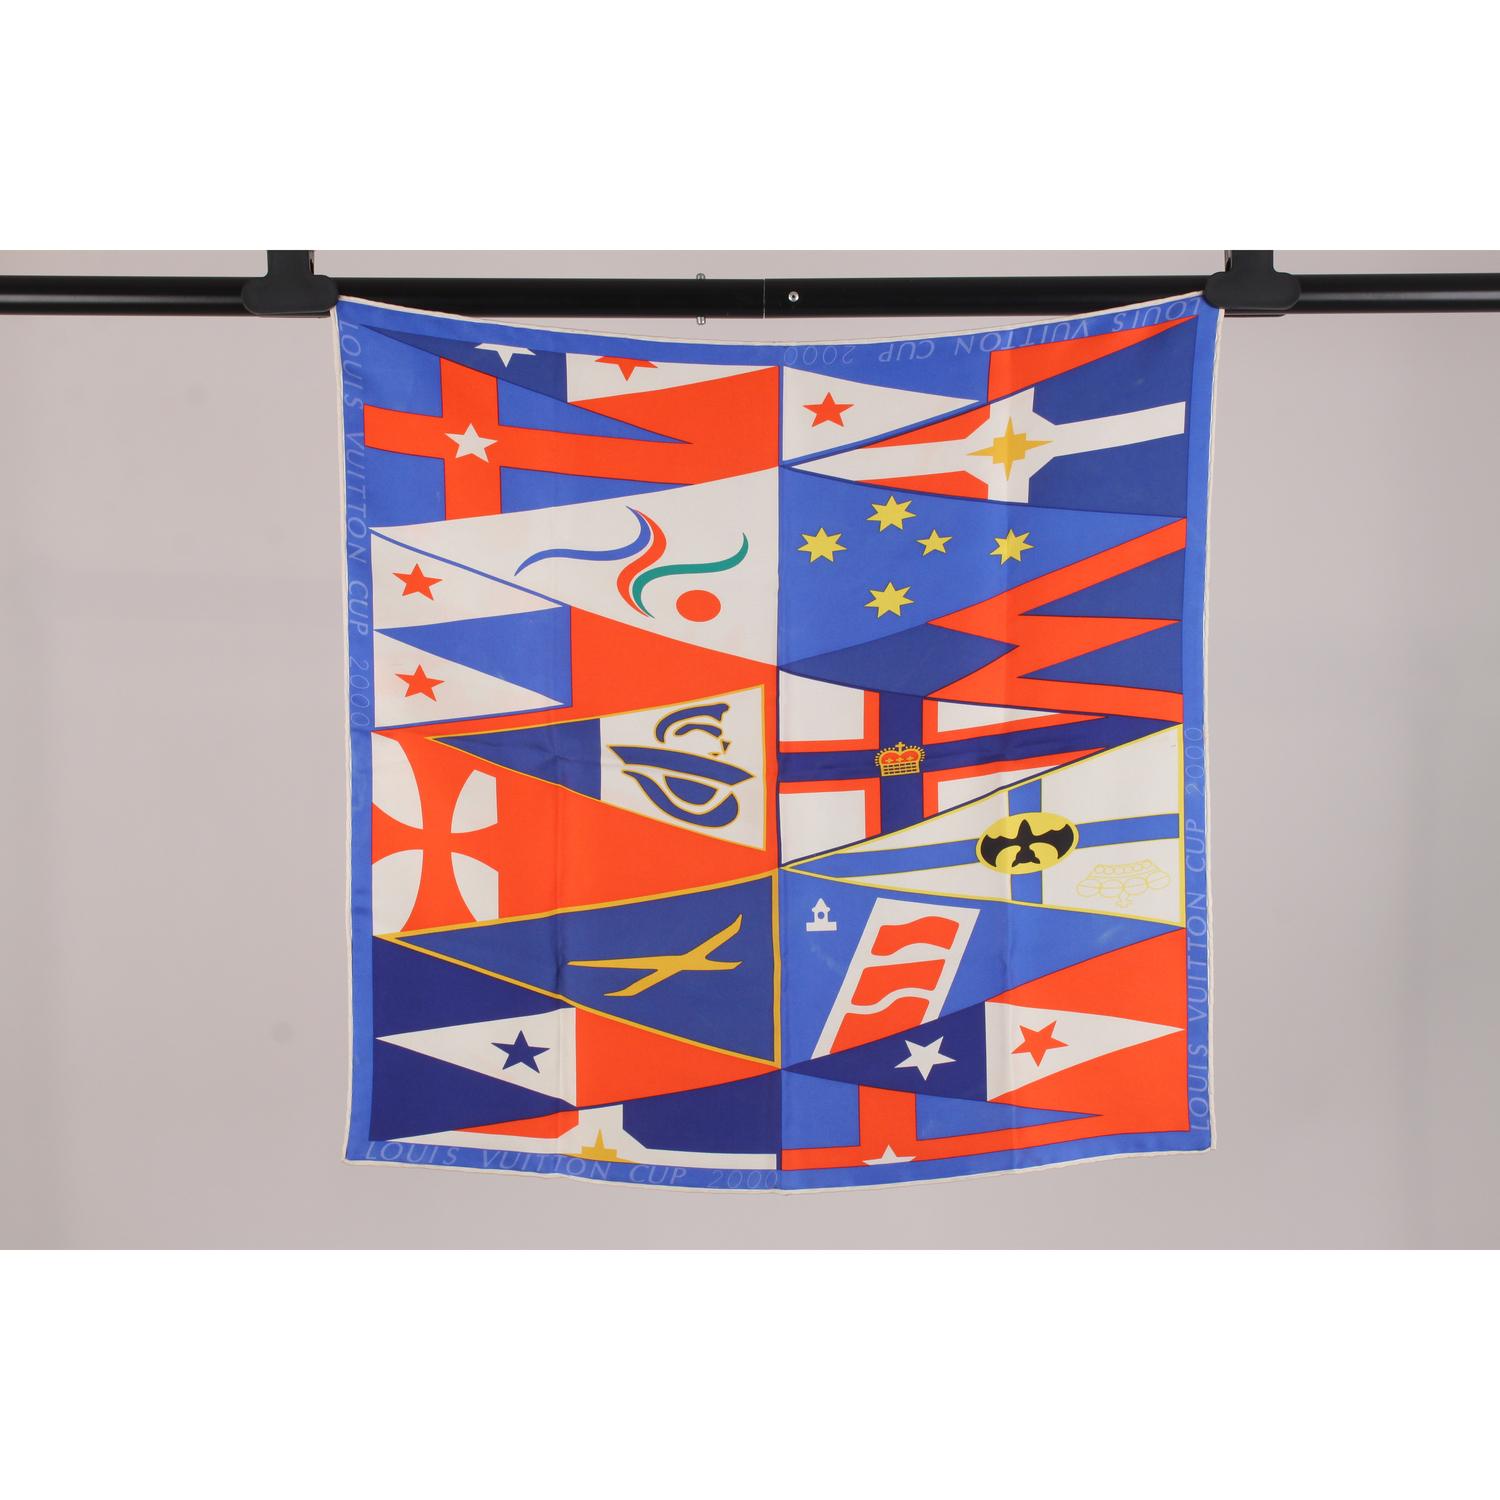 Limited Edition LOUIS VUITTON Silk Cup Scarf. A collector's piece created by Louis Vuitton for the the 2000 America's Cup annual sailing race (held in Auckland, New Zeland).  Crafted in 100% pure silk, it depicts a variety of nautical flags in